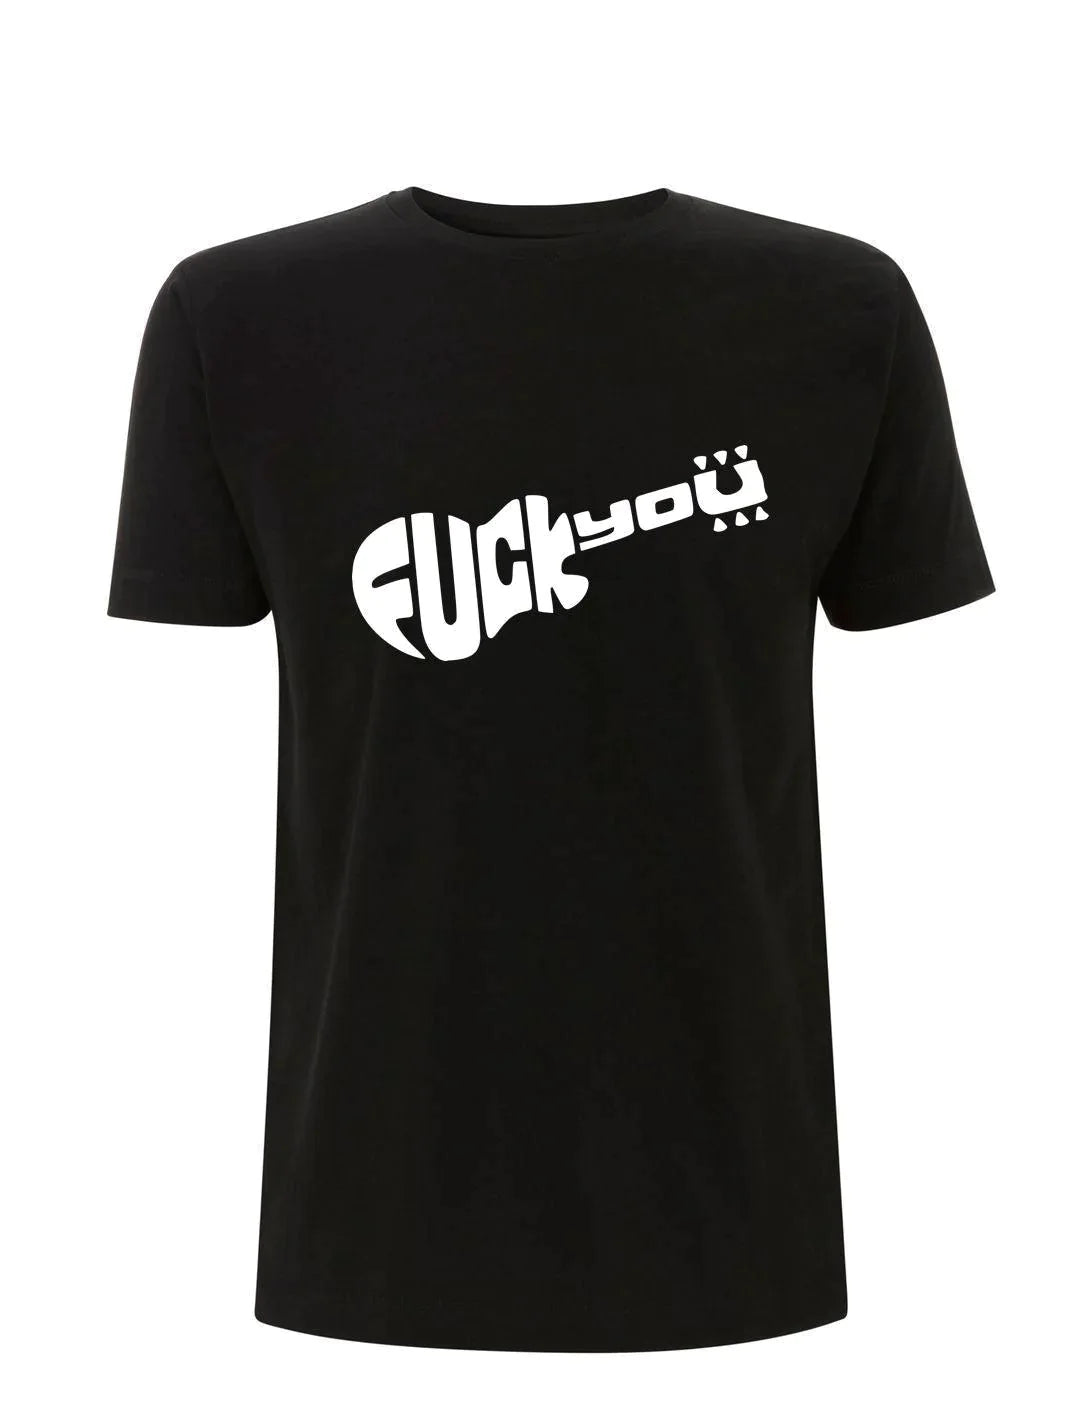 F*CK YOU: As Worn by Slash (Guns and Roses) T-Shirt and Sweatshirt in 3 colours - SOUND IS COLOUR